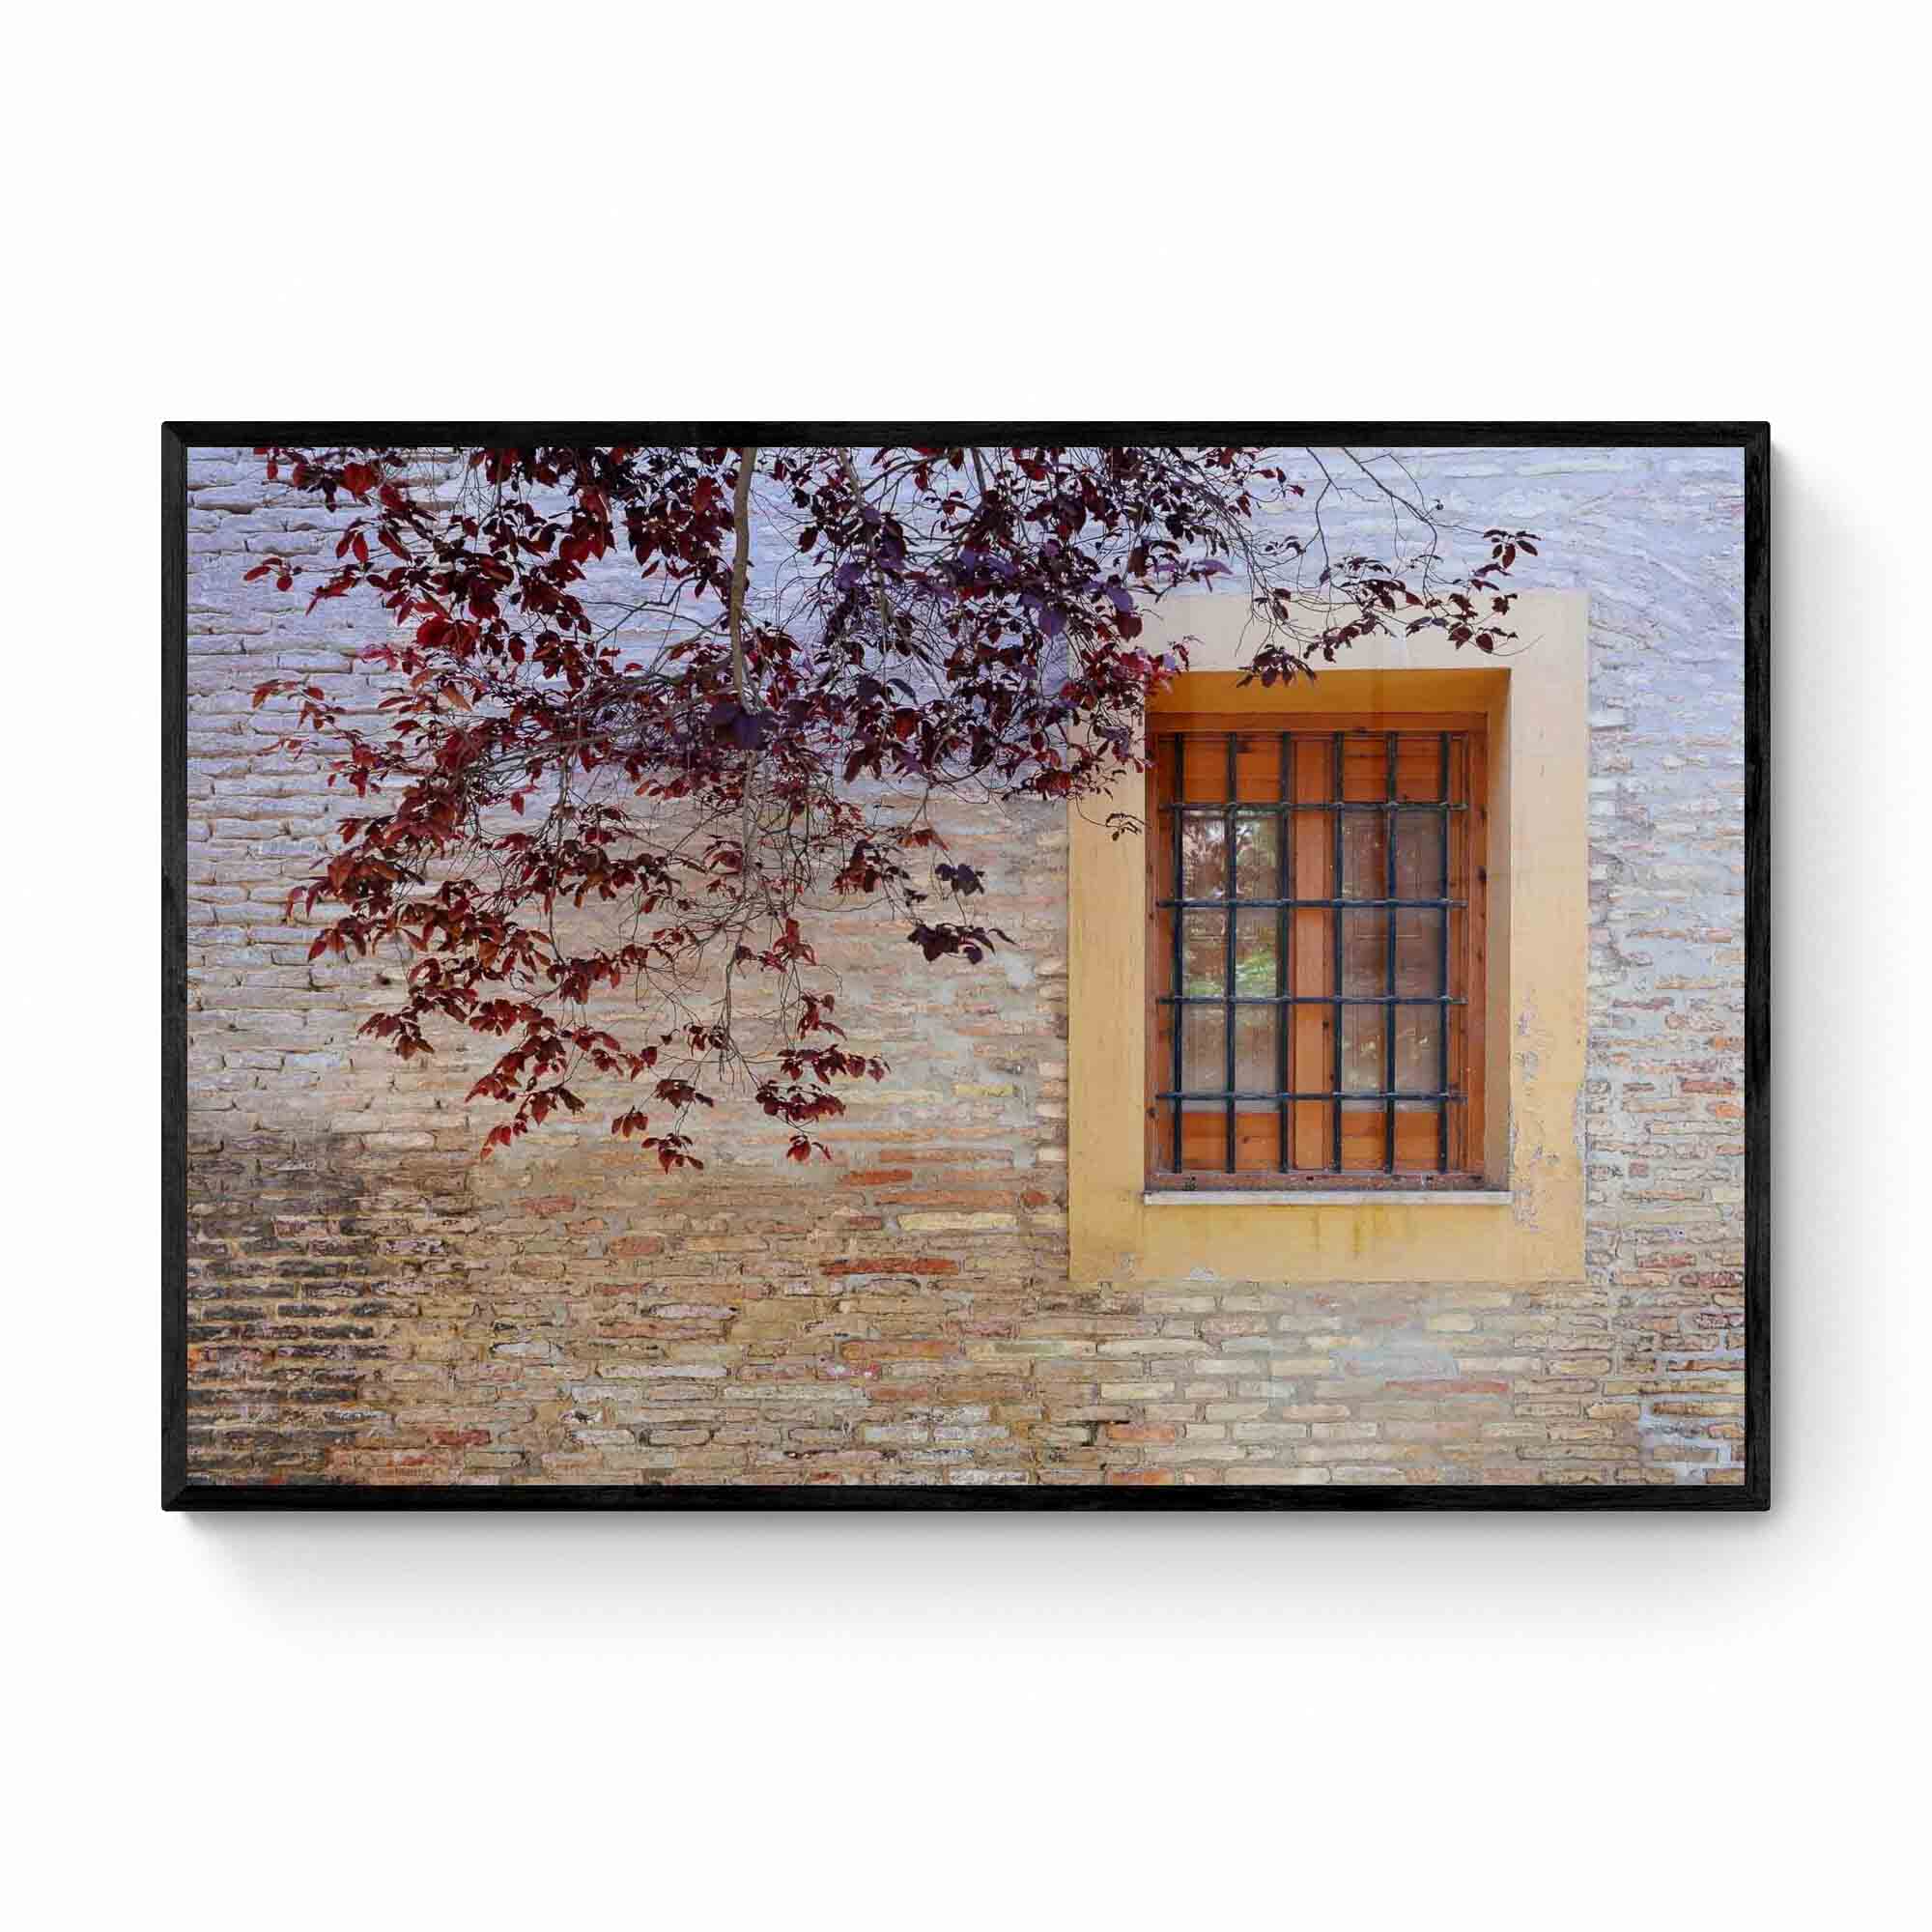 A rustic window with a yellow frame set in an old brick wall, adorned by autumn leaves, in Zaragoza, Spain.